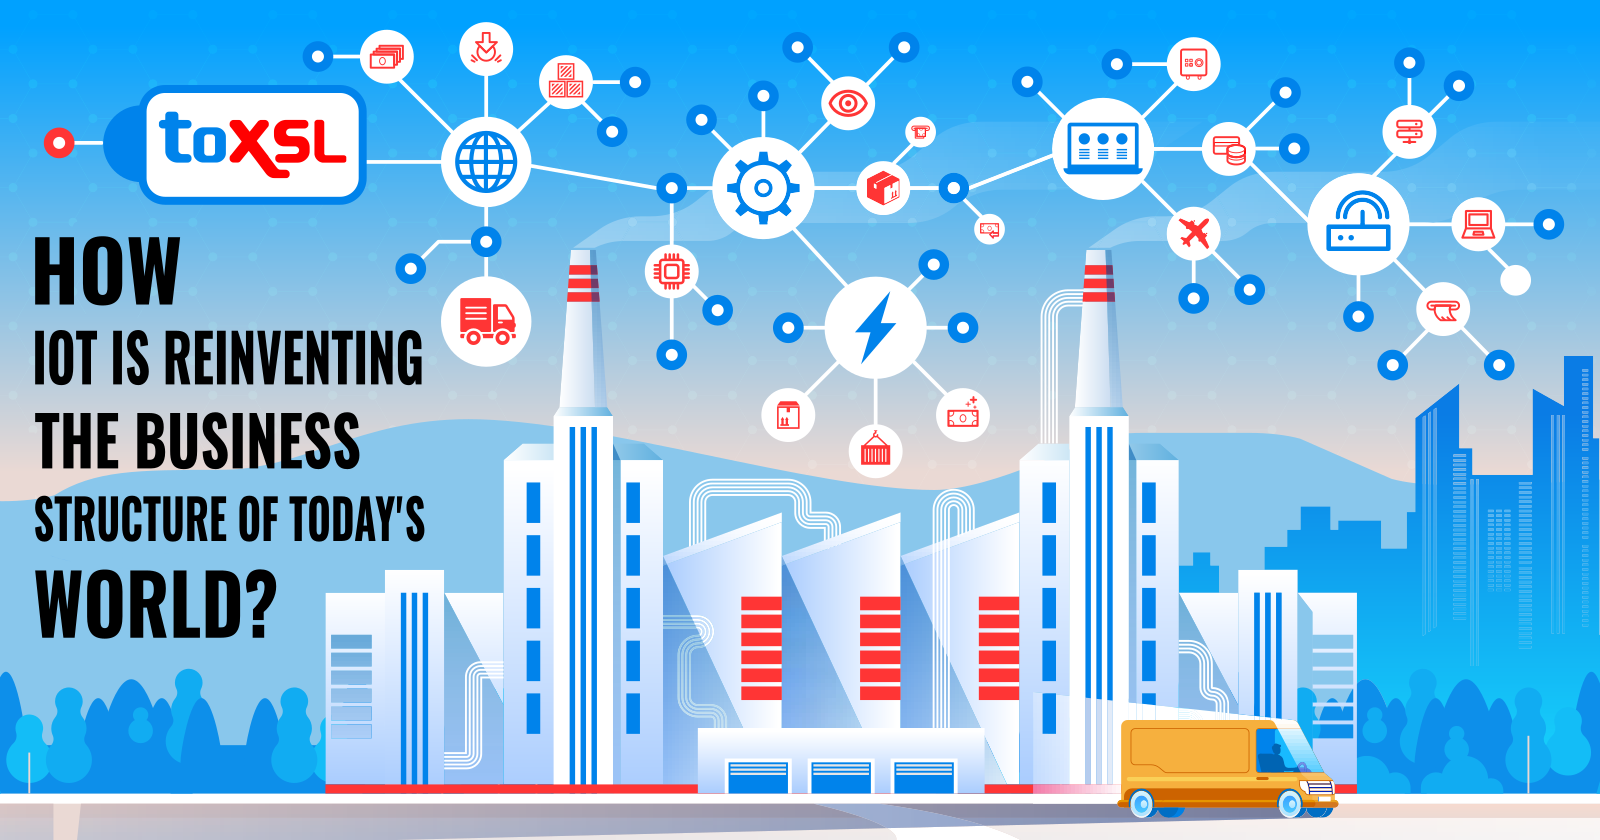 How IoT Is Reinventing The Business Structure of Today's World?